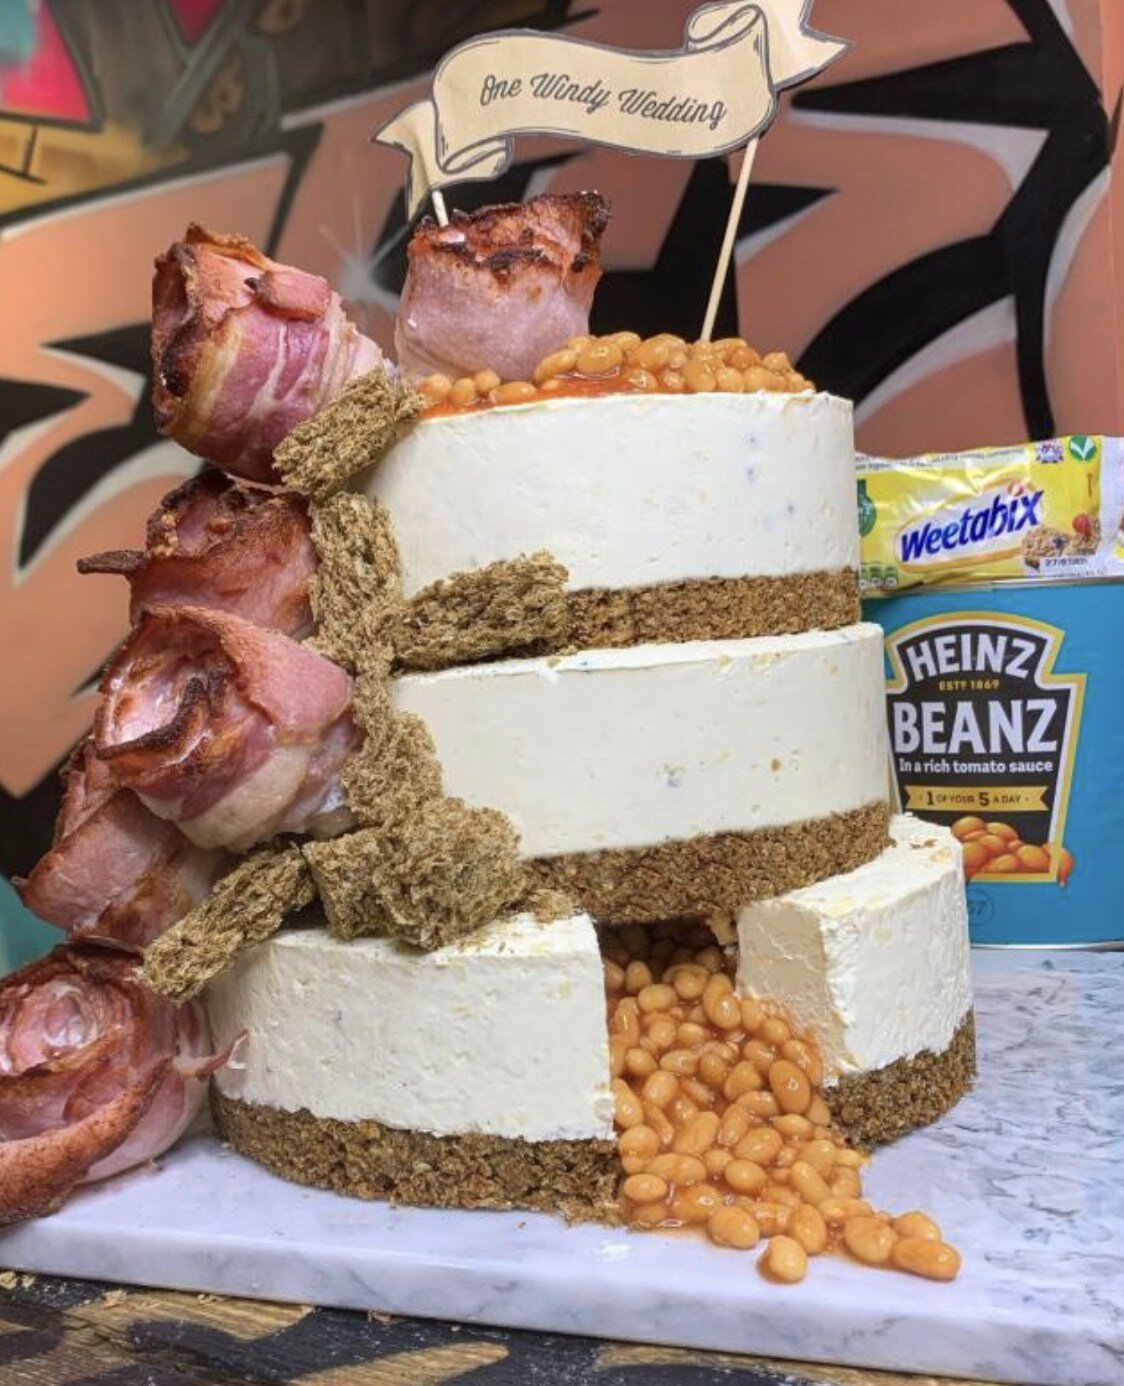 They say you eat with with your eyes first 🤮 #weddingcakedundee #weddingcakeperth #weddingcakeperthshire  #weddingcakescotland 

Share your unusual wedding cake photos in the comments